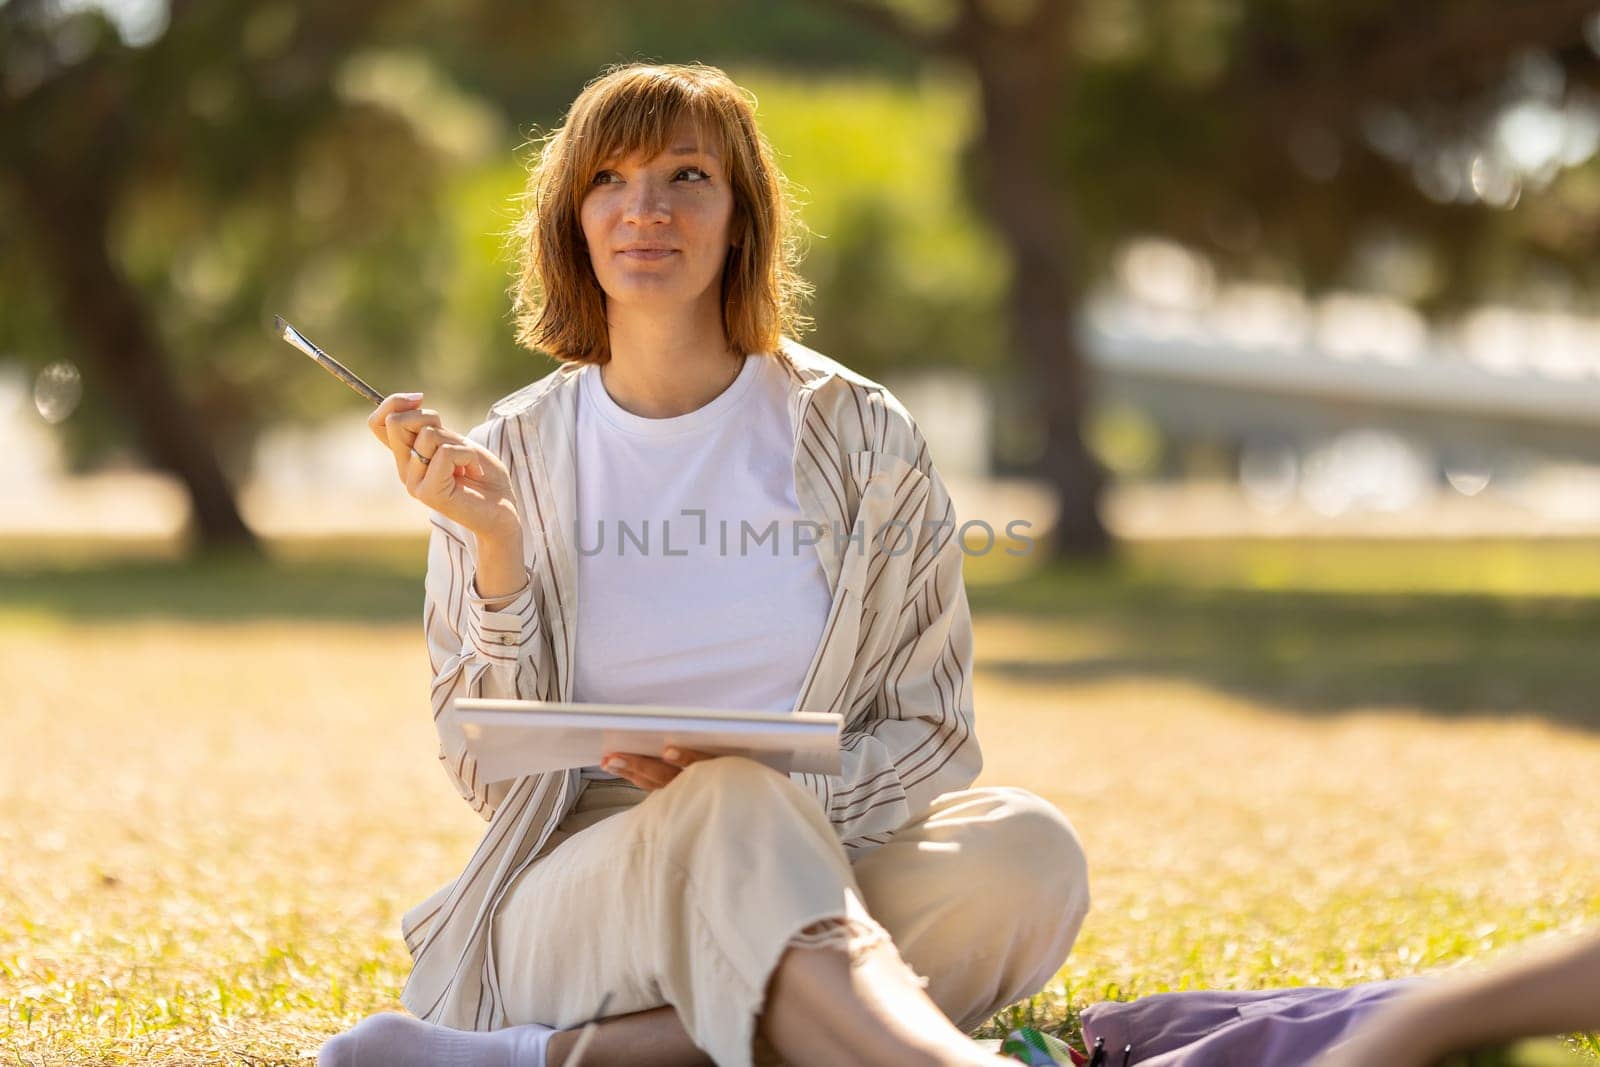 Adult pretty woman sitting in the blooming park holding a painting brush. Mid shot